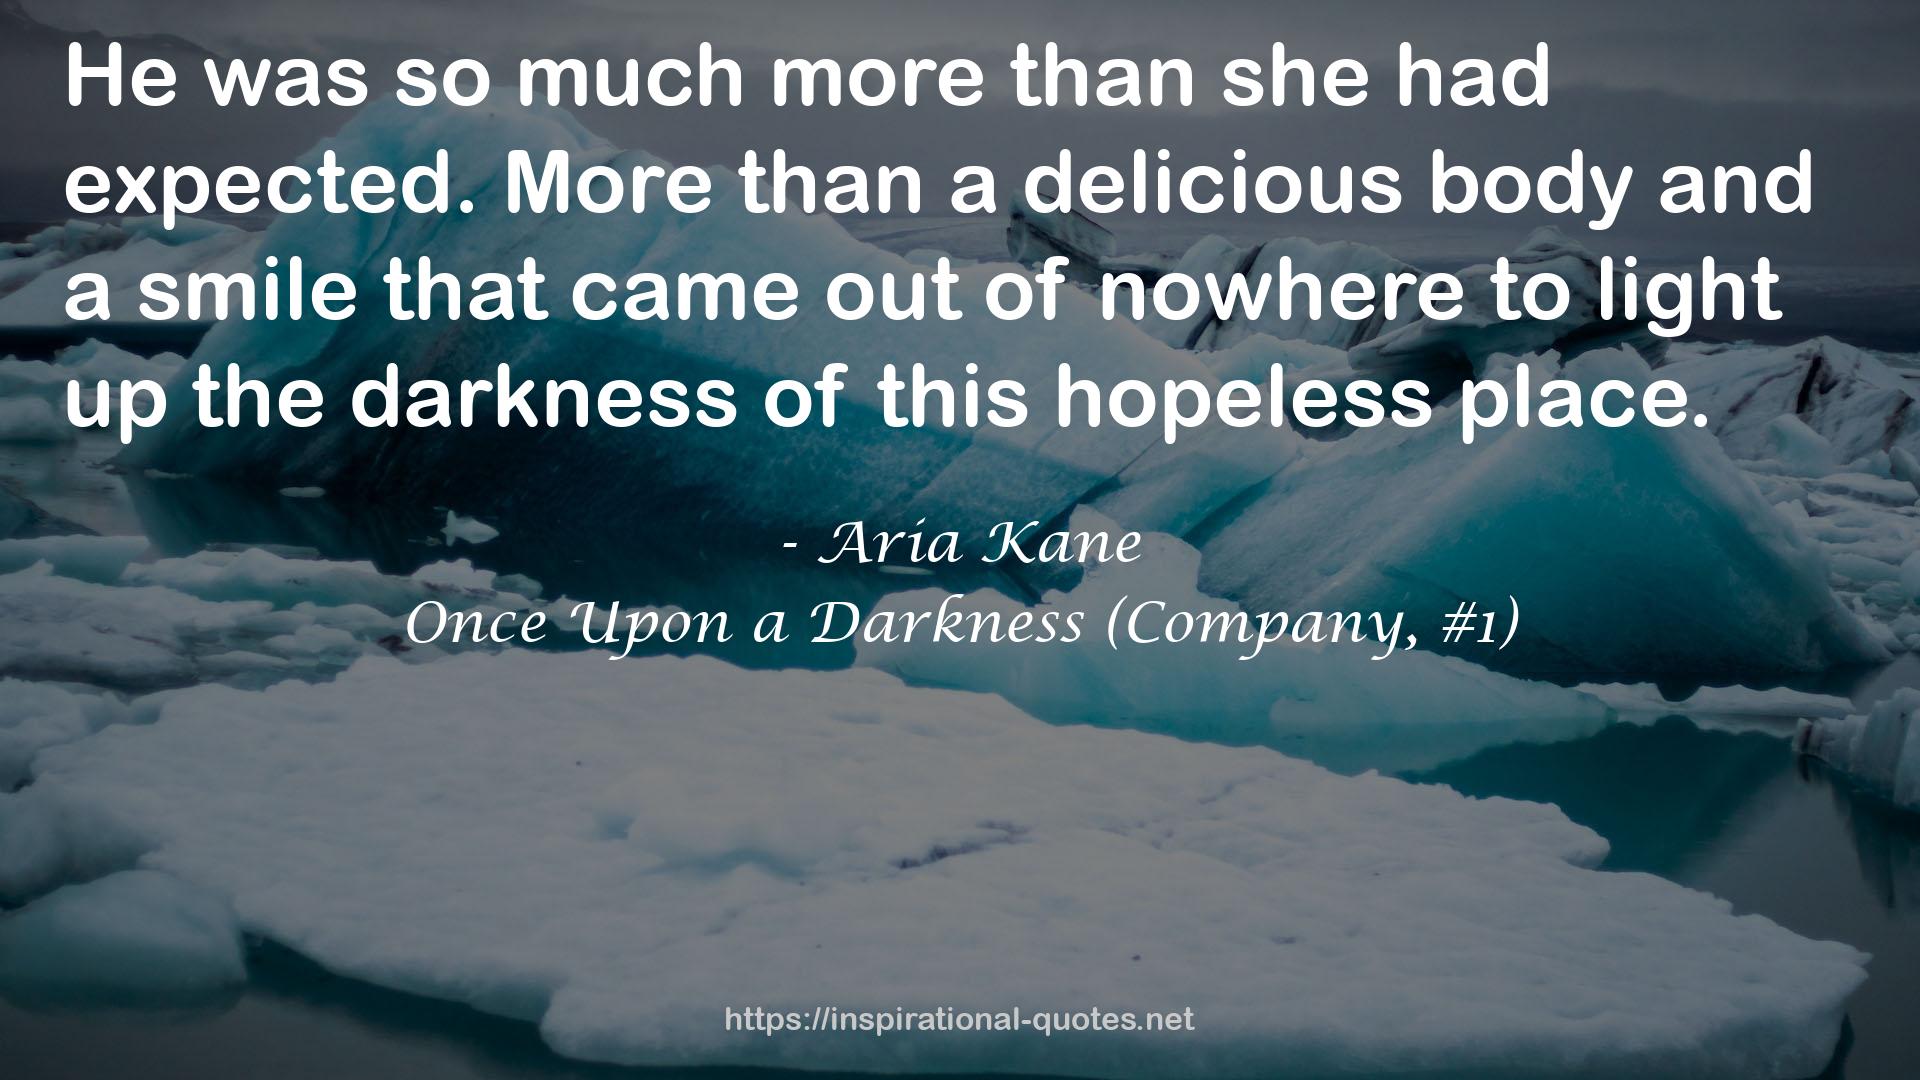 Once Upon a Darkness (Company, #1) QUOTES